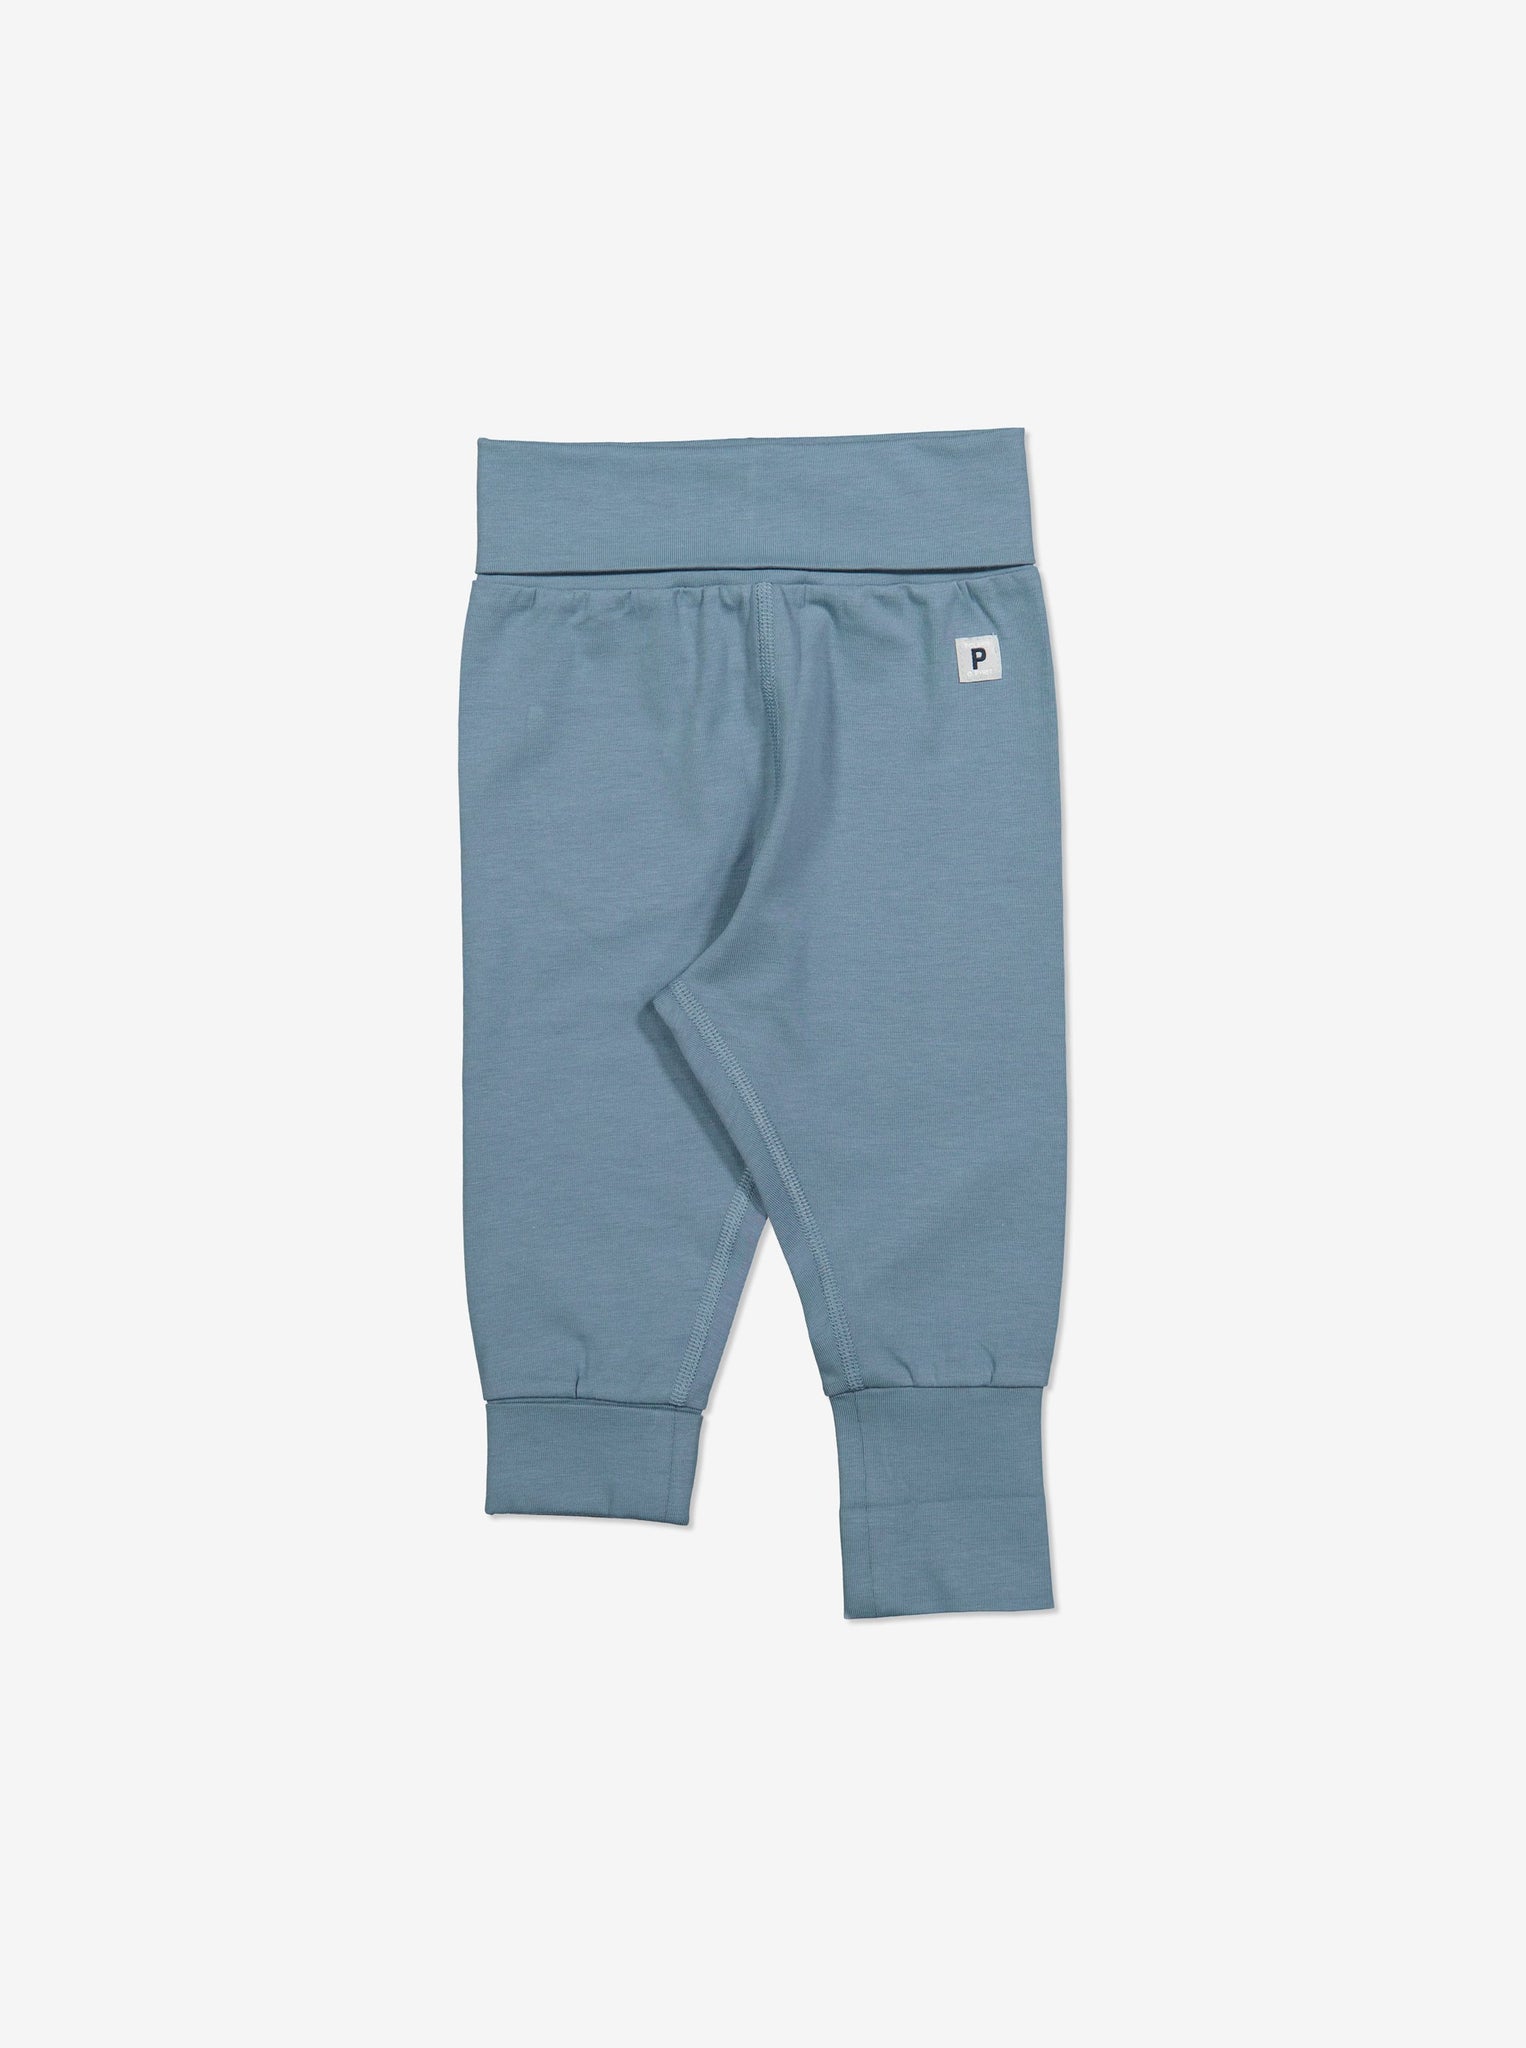  Organic Blue Baby Leggings from Polarn O. Pyret Kidswear. Made from eco-friendly materials.